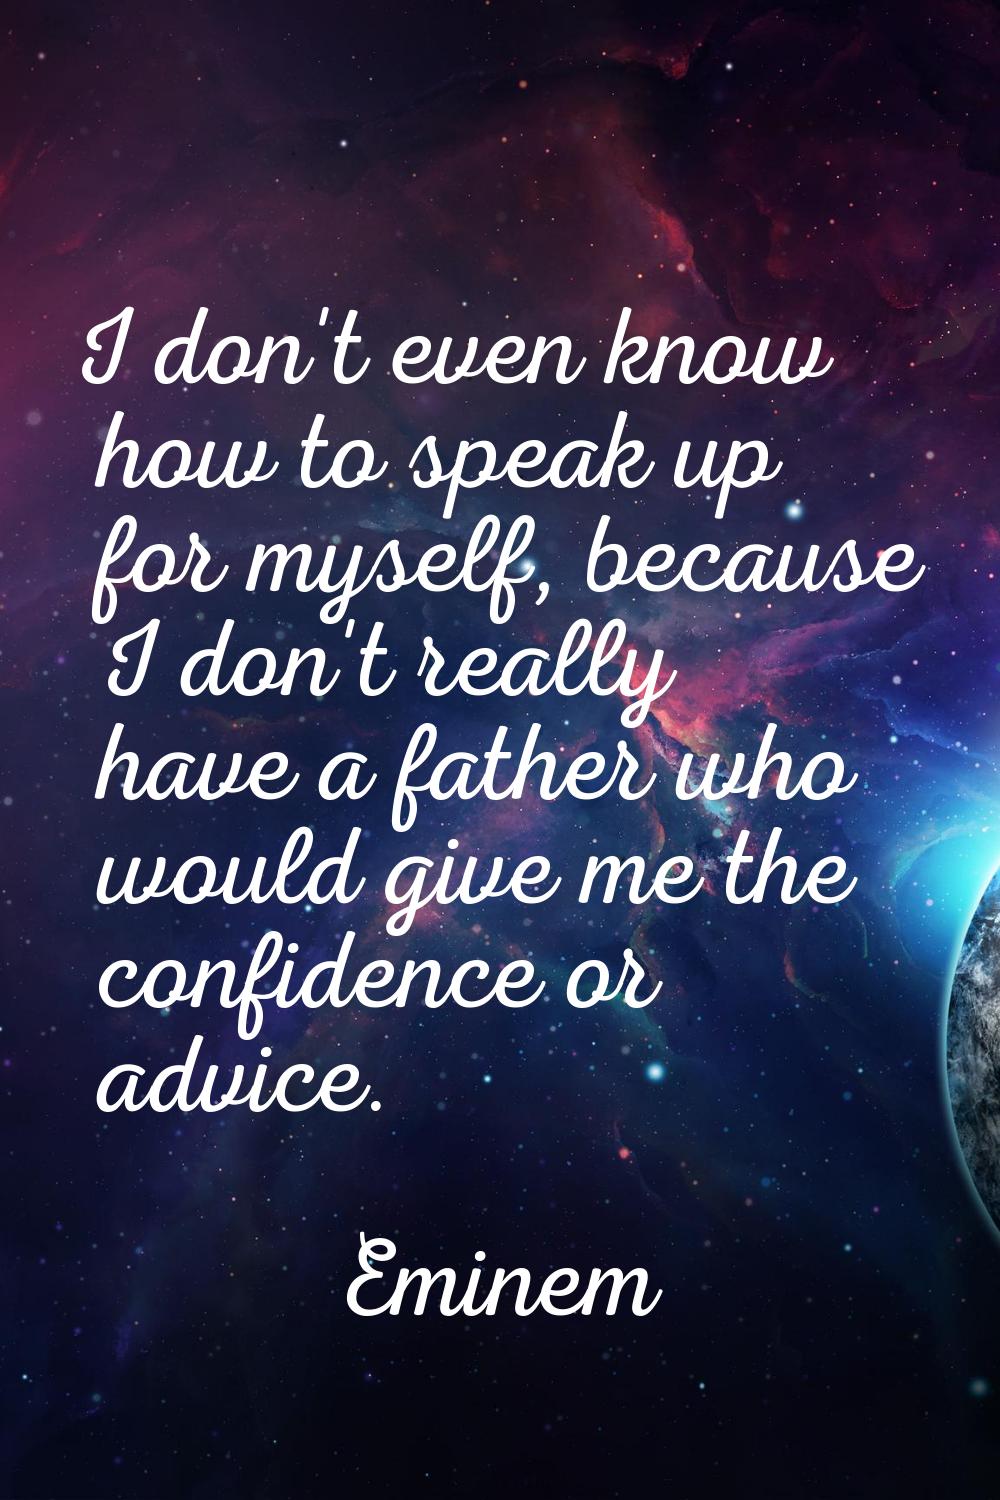 I don't even know how to speak up for myself, because I don't really have a father who would give m